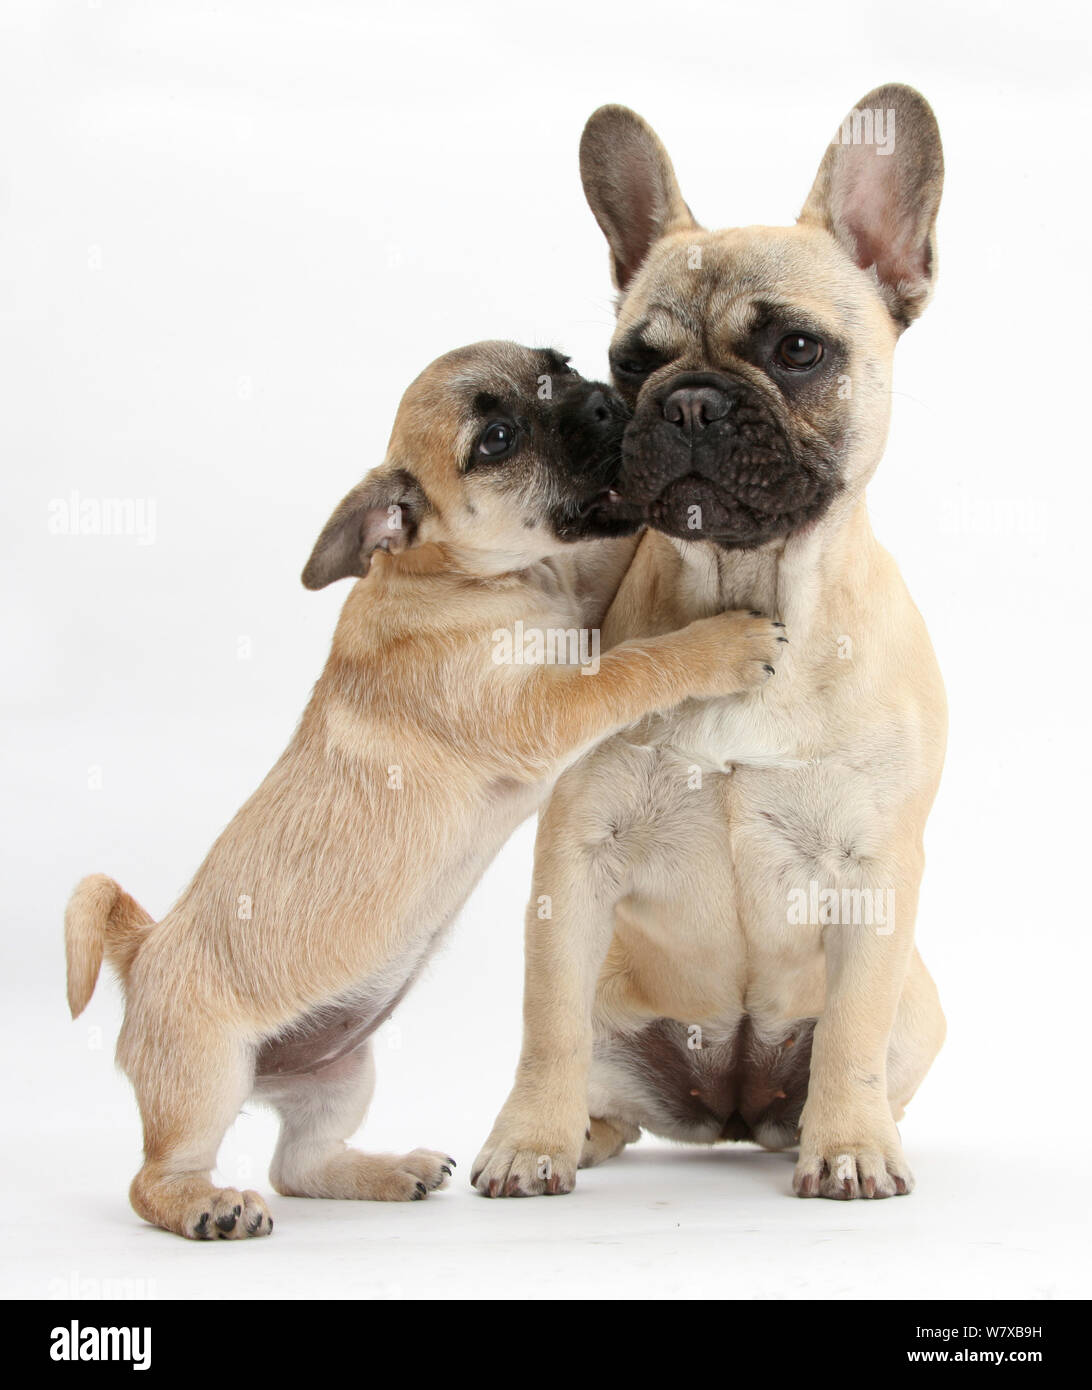 Pug x Jack Russell Terrier 'Jug' puppy, age 9 weeks, playing with French Bulldog Stock Photo